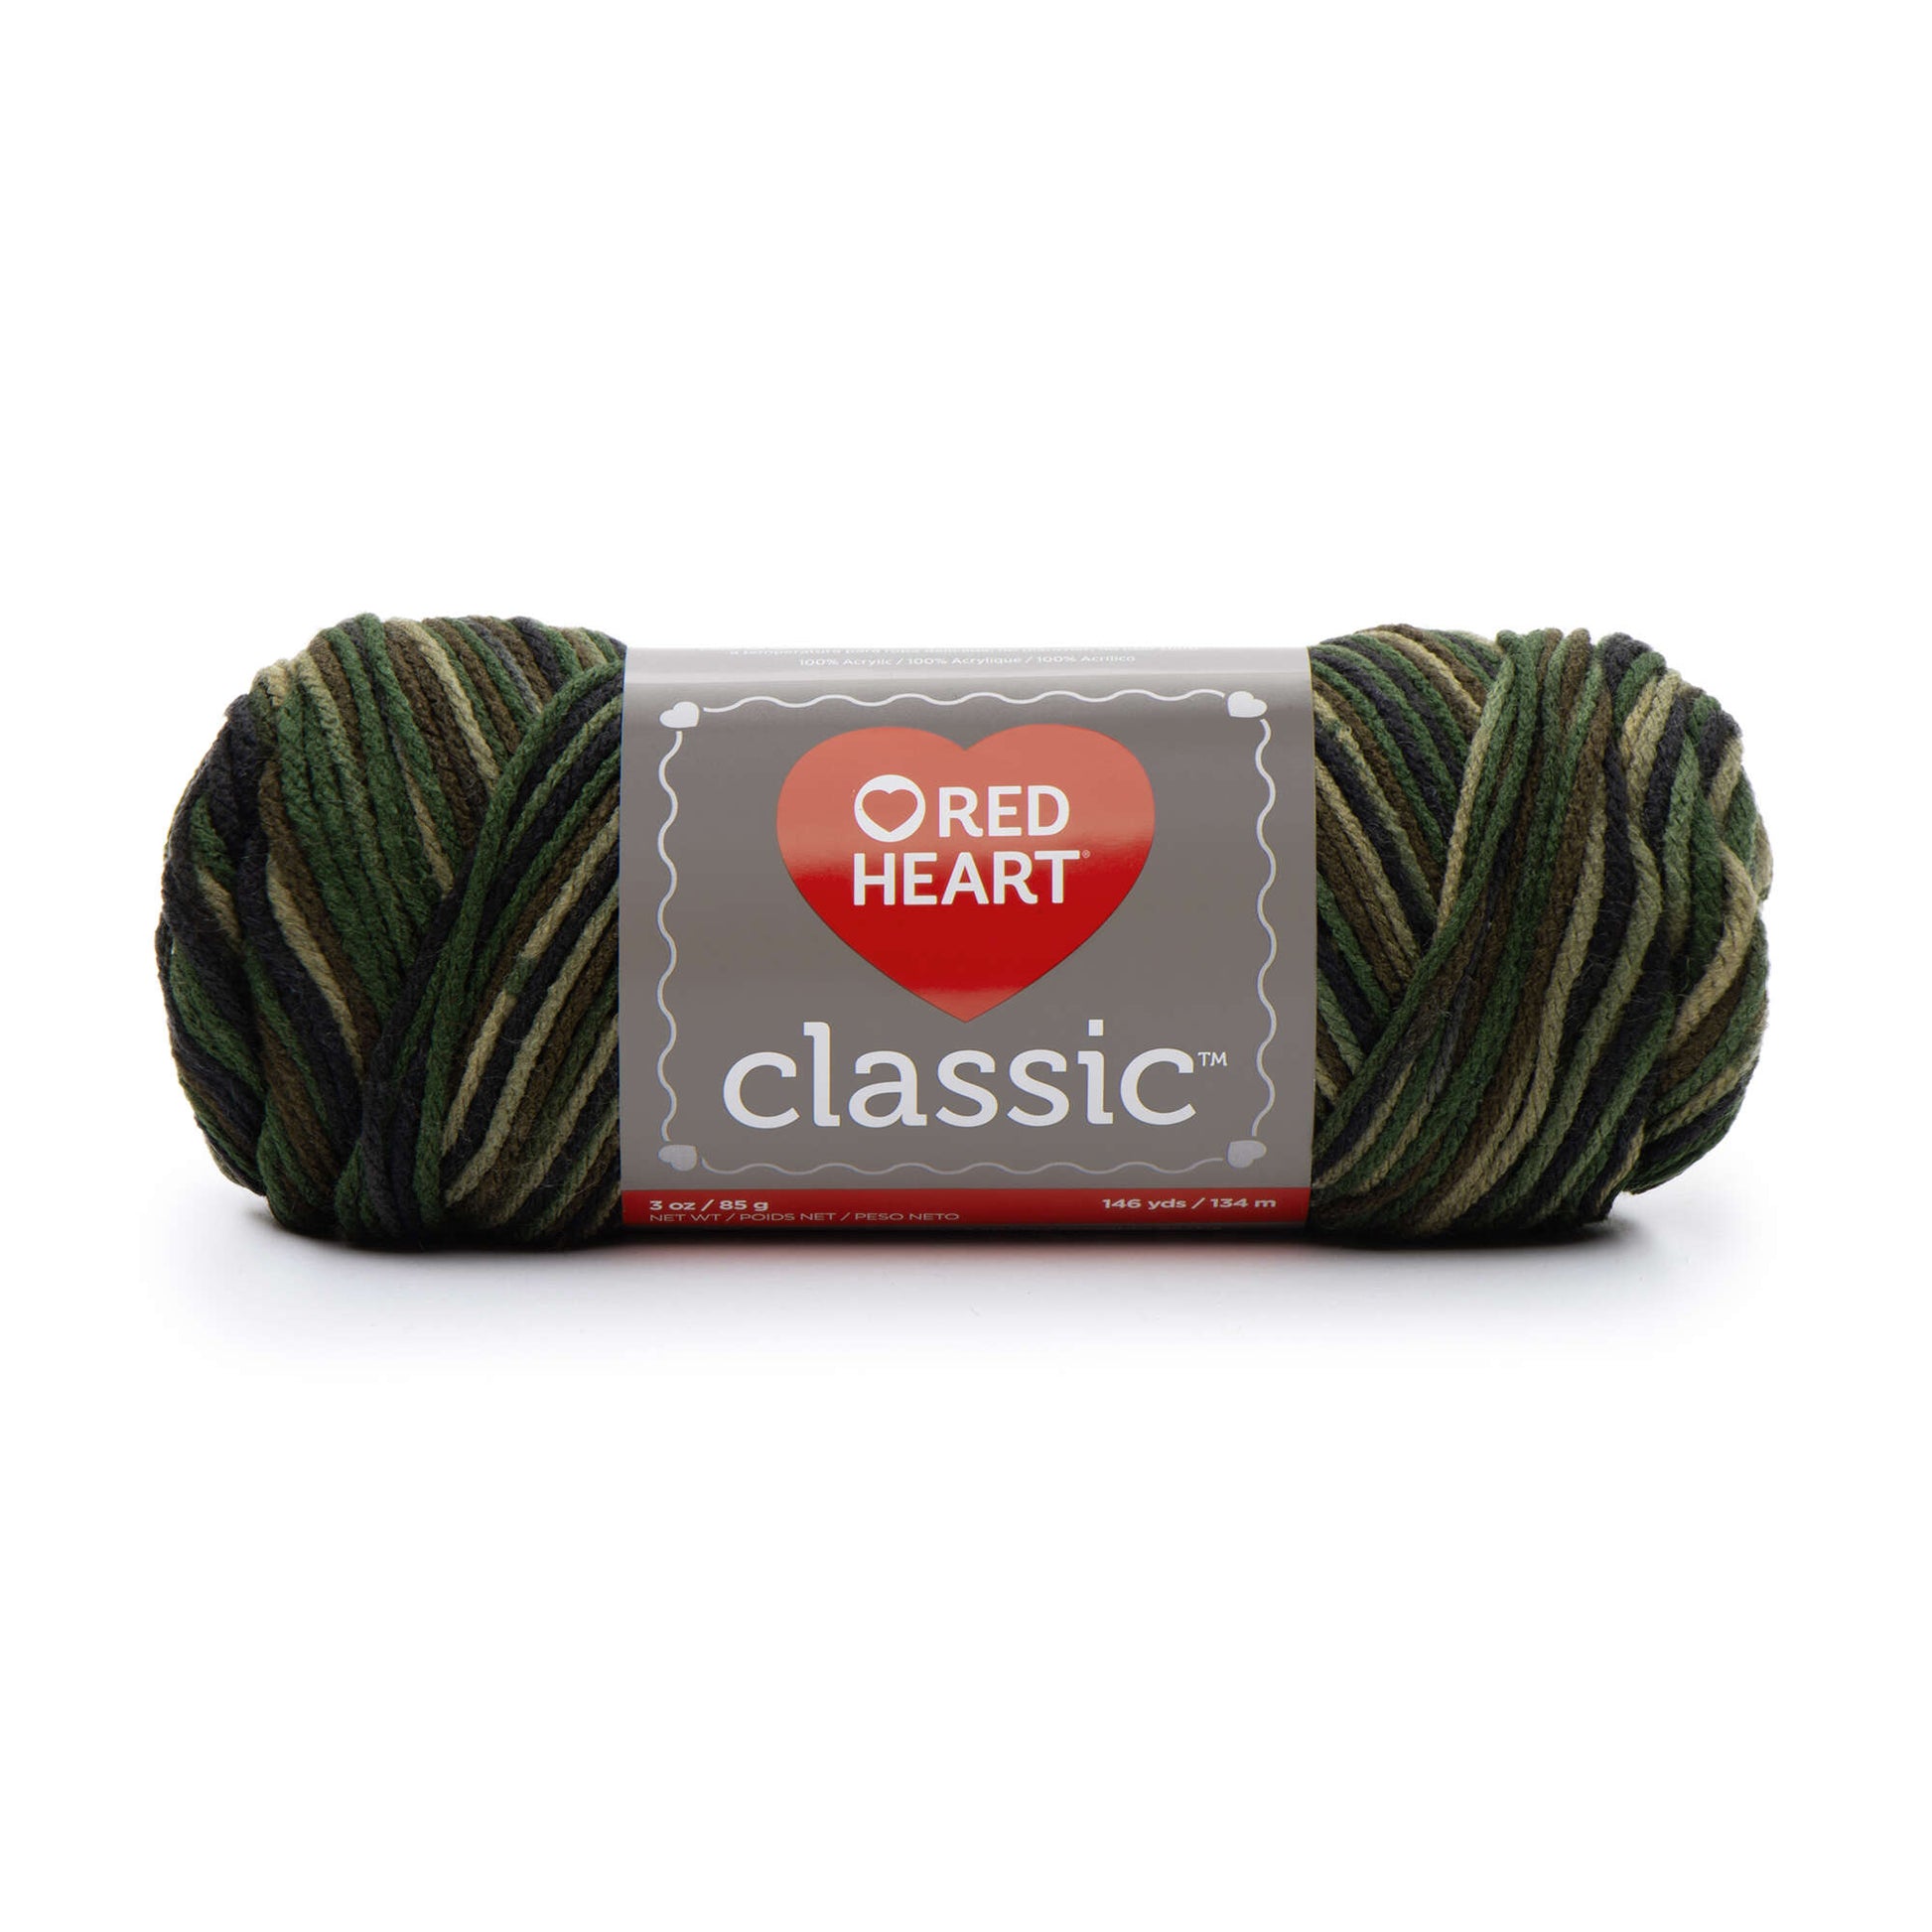 Red Heart Classic Yarn - Discontinued Shades